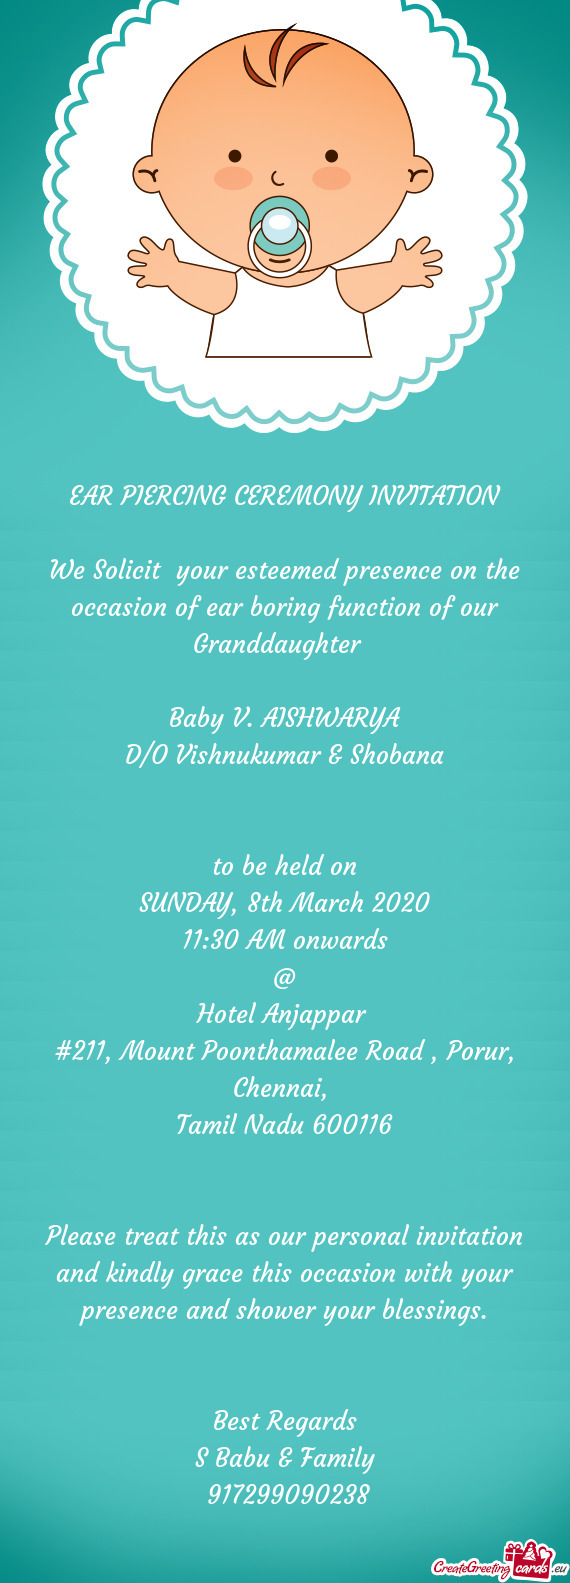 We Solicit your esteemed presence on the occasion of ear boring function of our Granddaughter